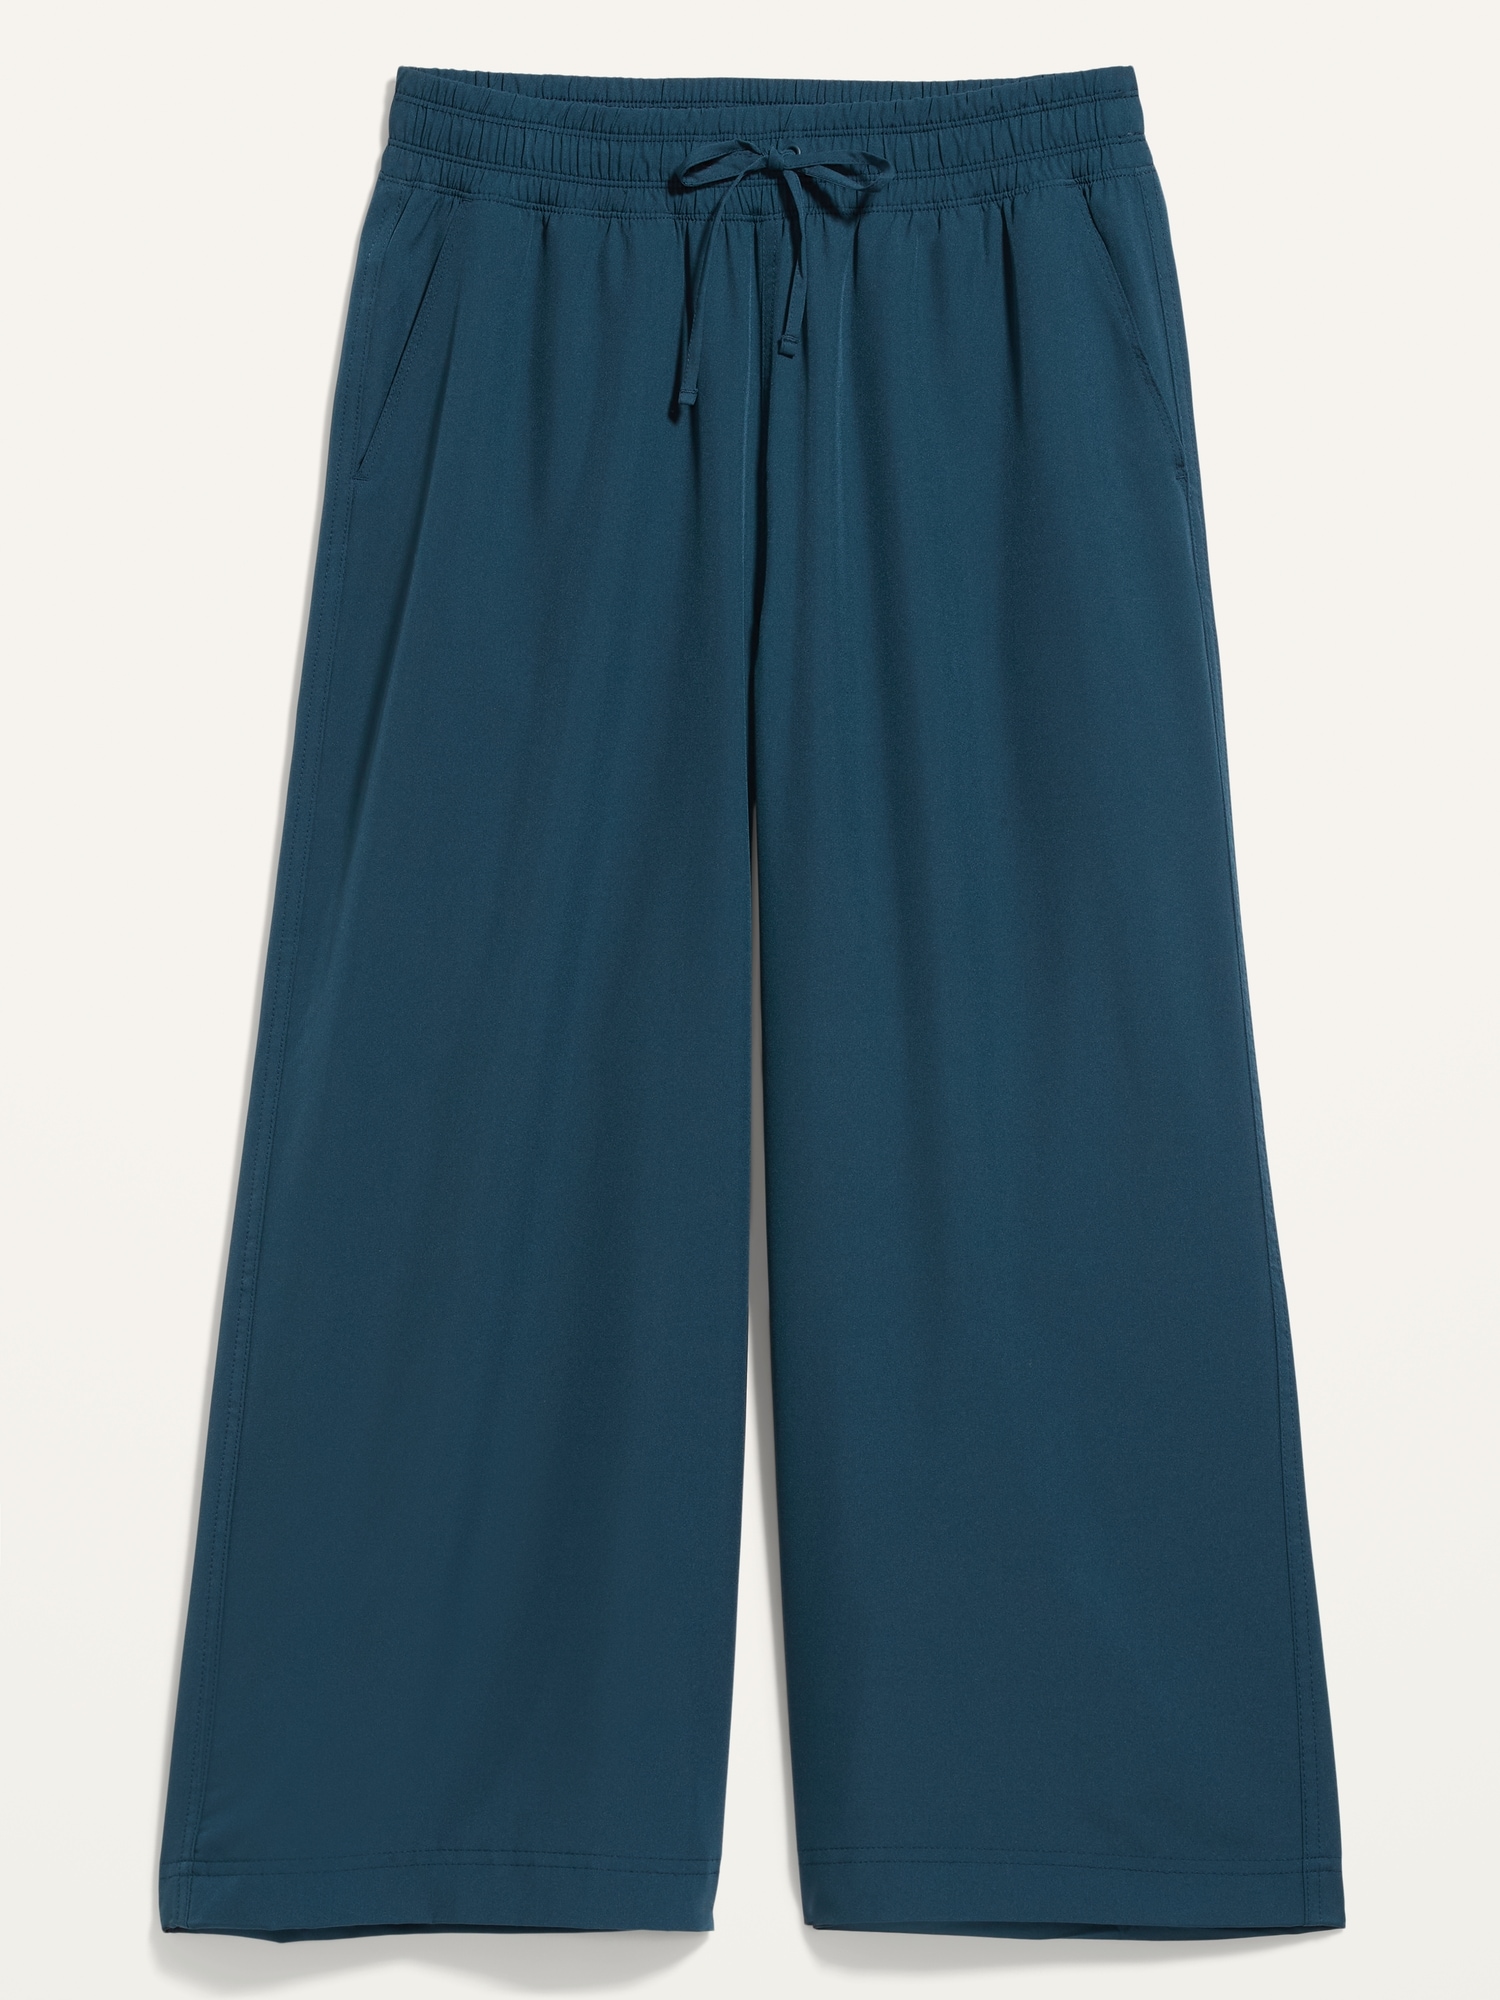 Extra High-Waisted StretchTech Cropped Wide-Leg Pants for Women